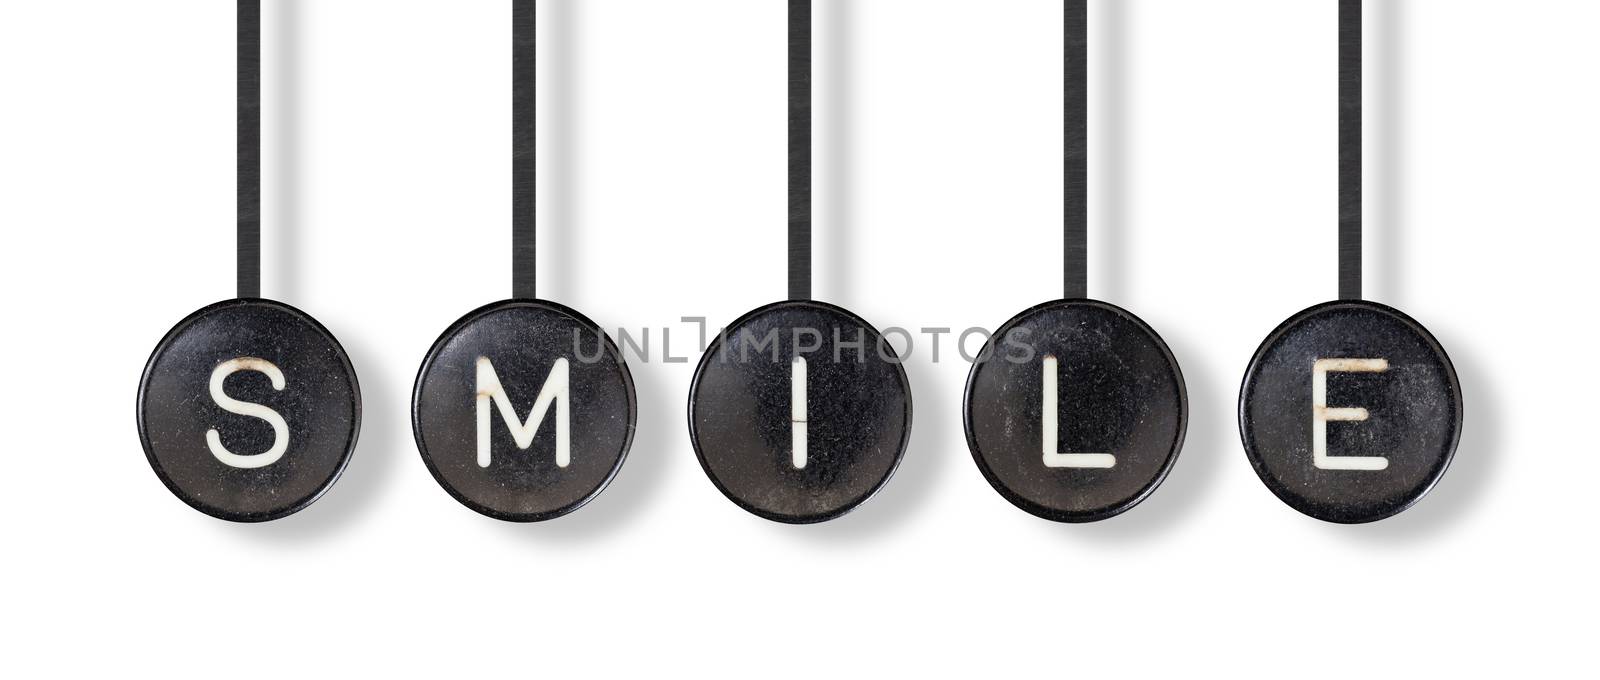 Typewriter buttons, isolated on white background - Smile